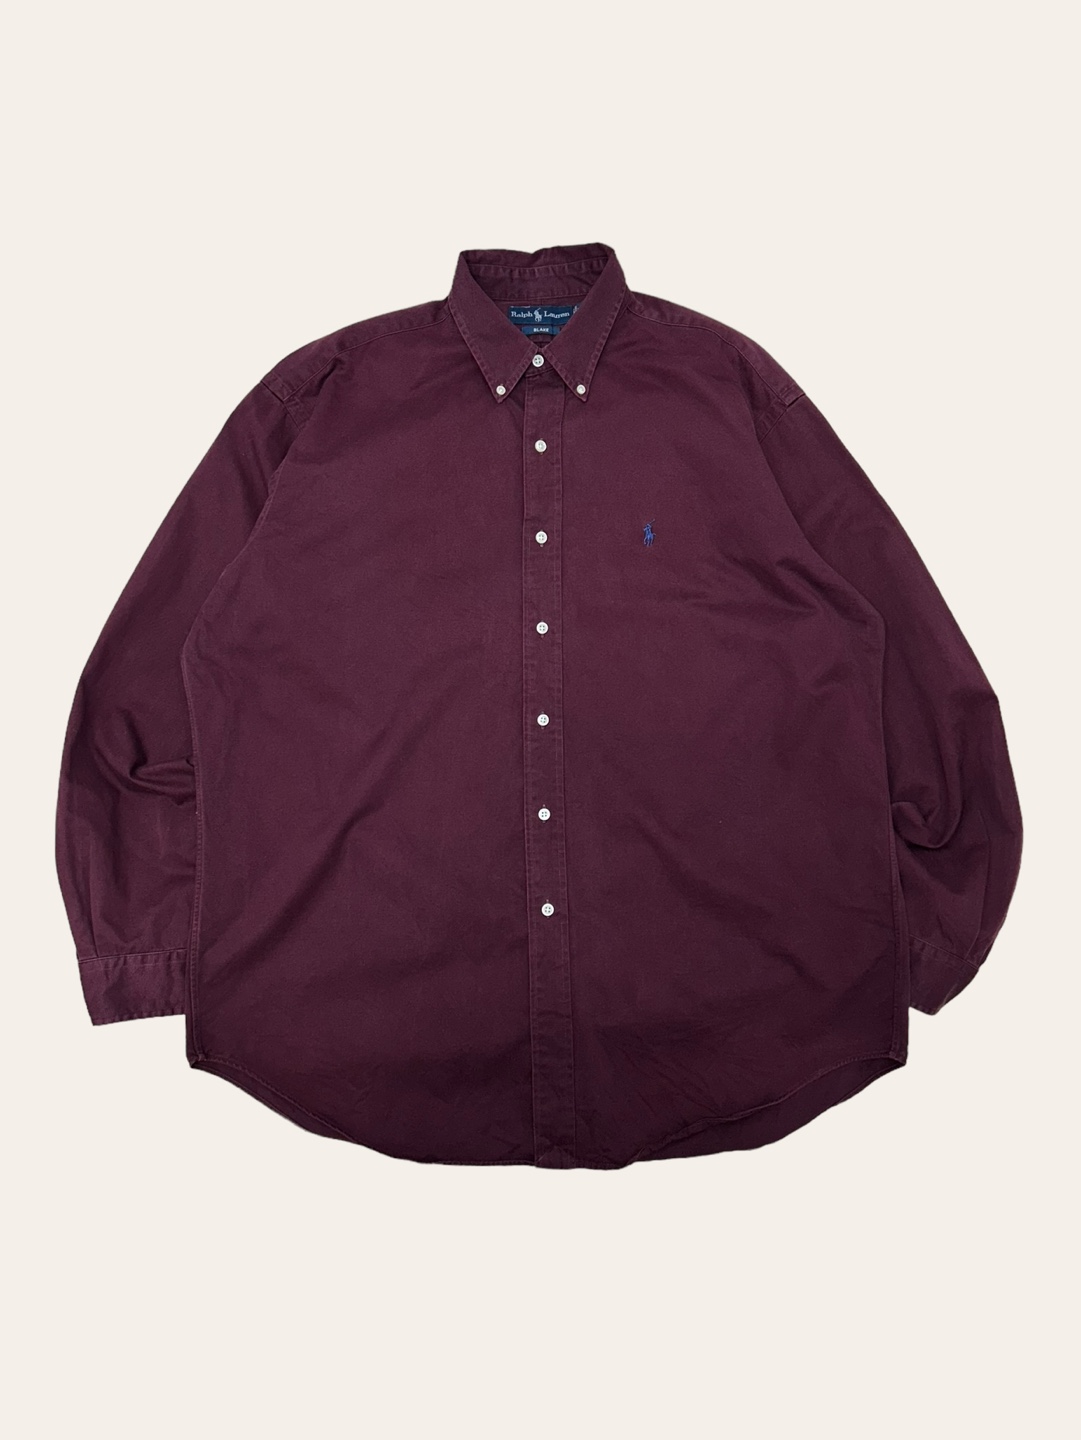 (From USA)Polo ralph lauren burgundy color solid shirt L